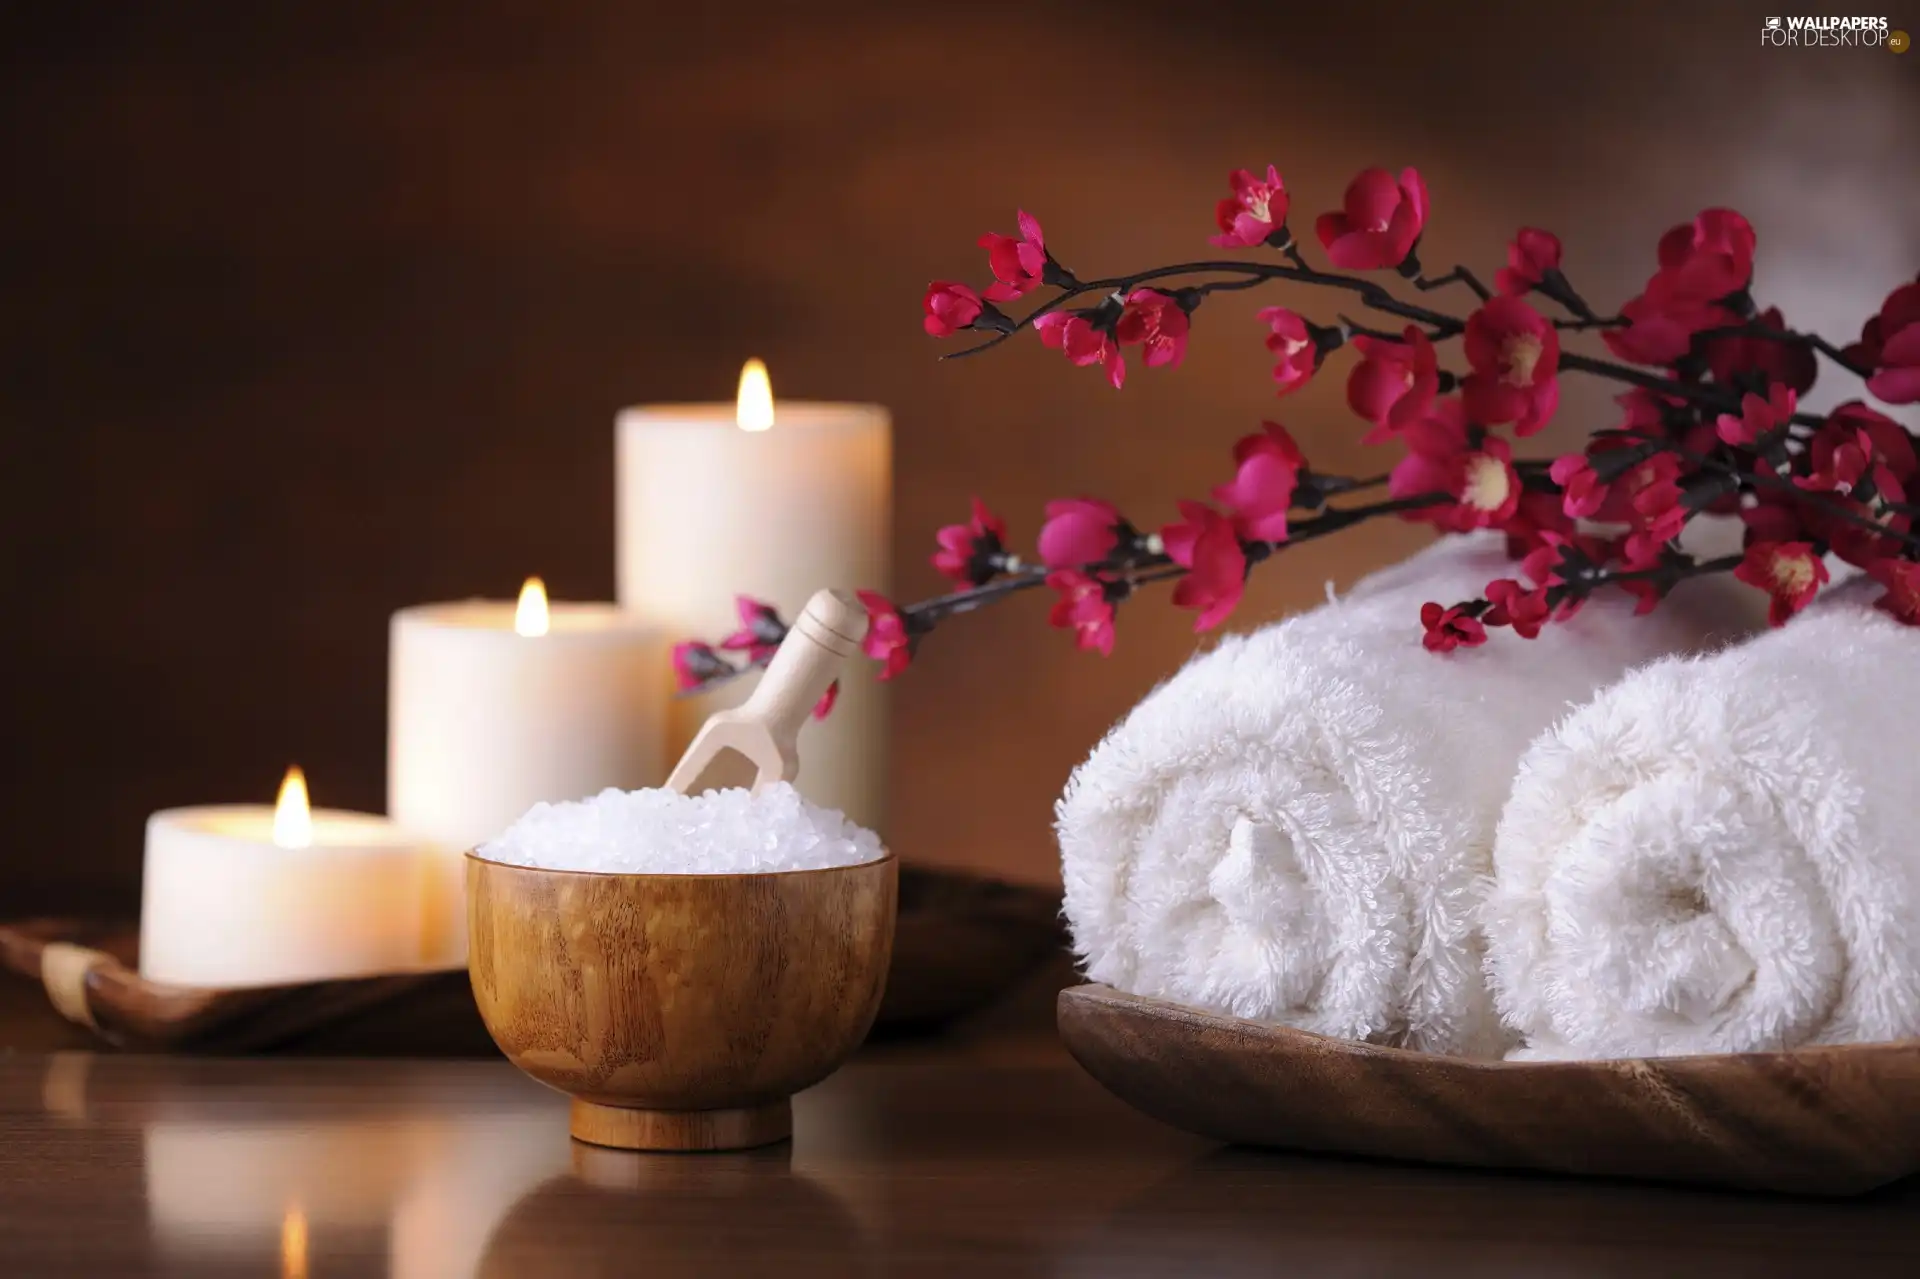 Flowers, Towels, Spa, Candles, decoration